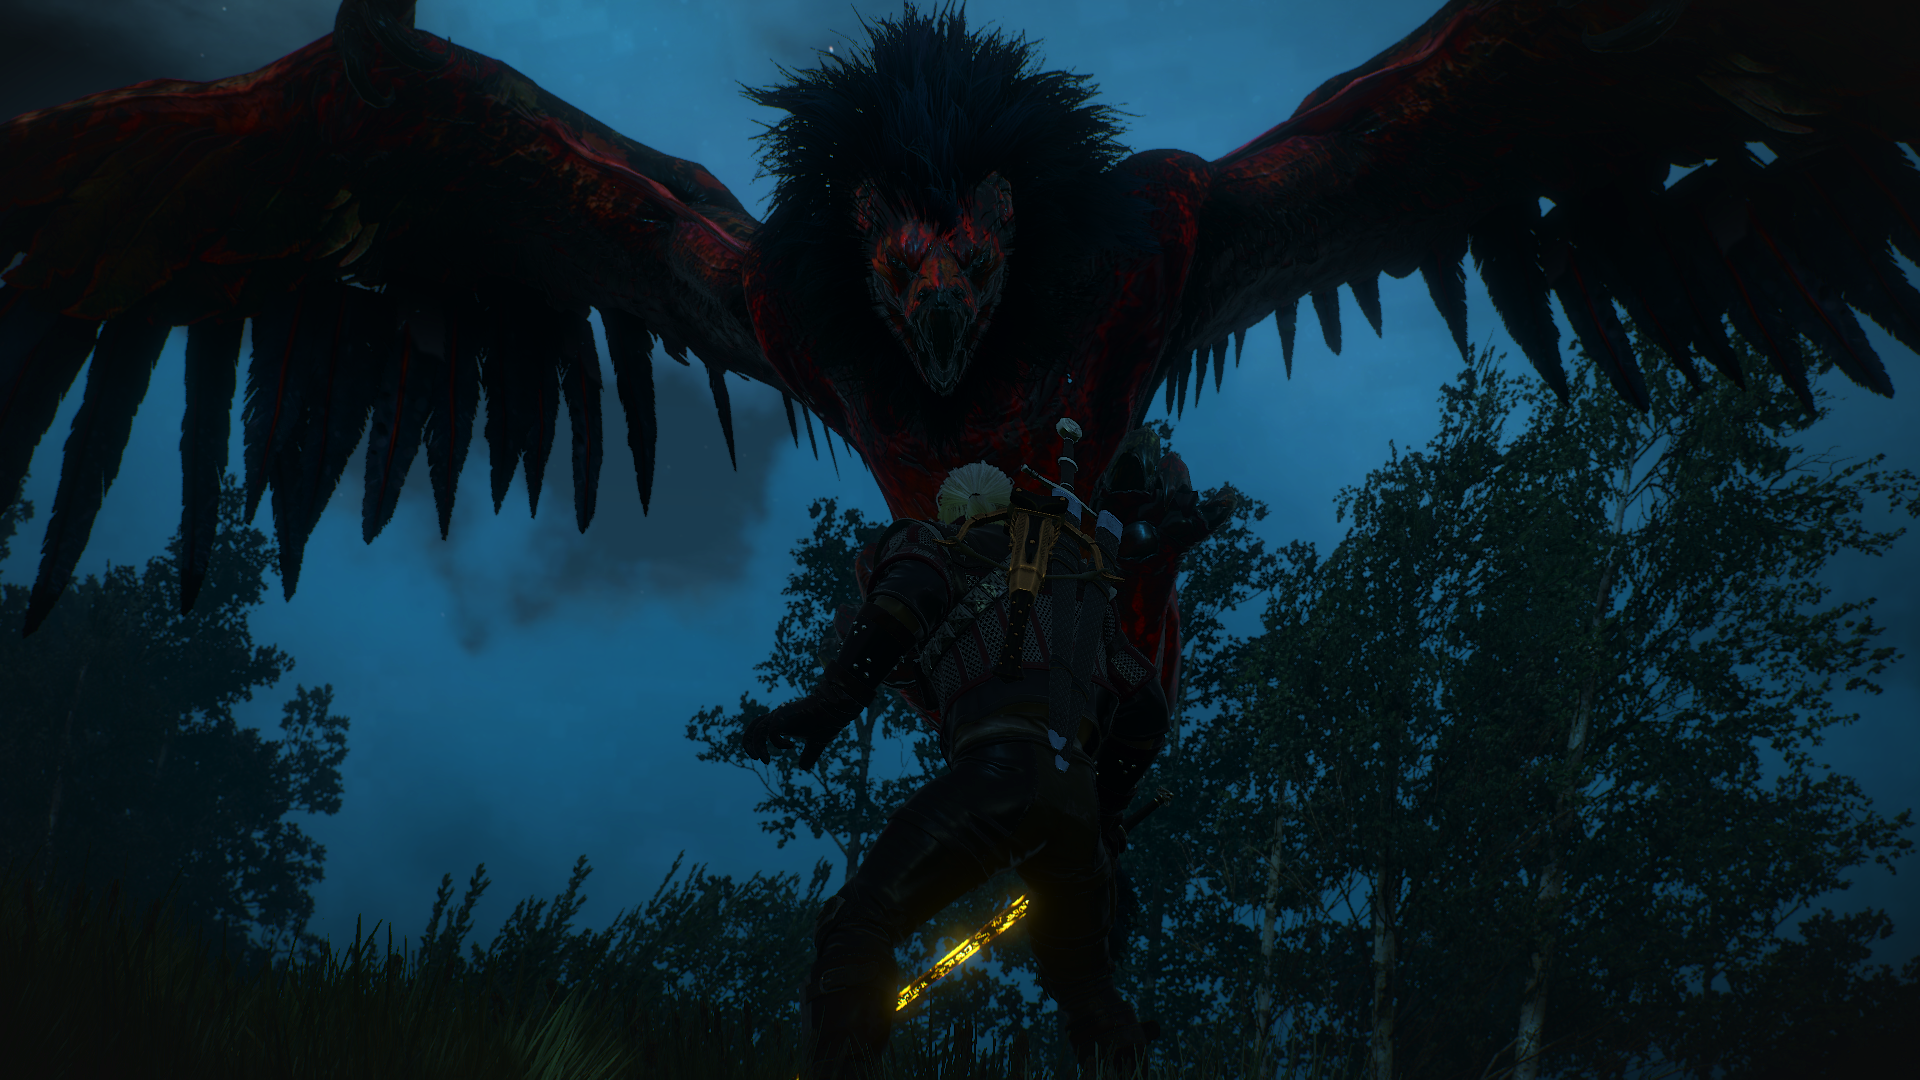 General 1920x1080 The Witcher 3: Wild Hunt Velen The White Wolf Geralt of Rivia The Witcher screen shot griffins creature RPG video games PC gaming wings